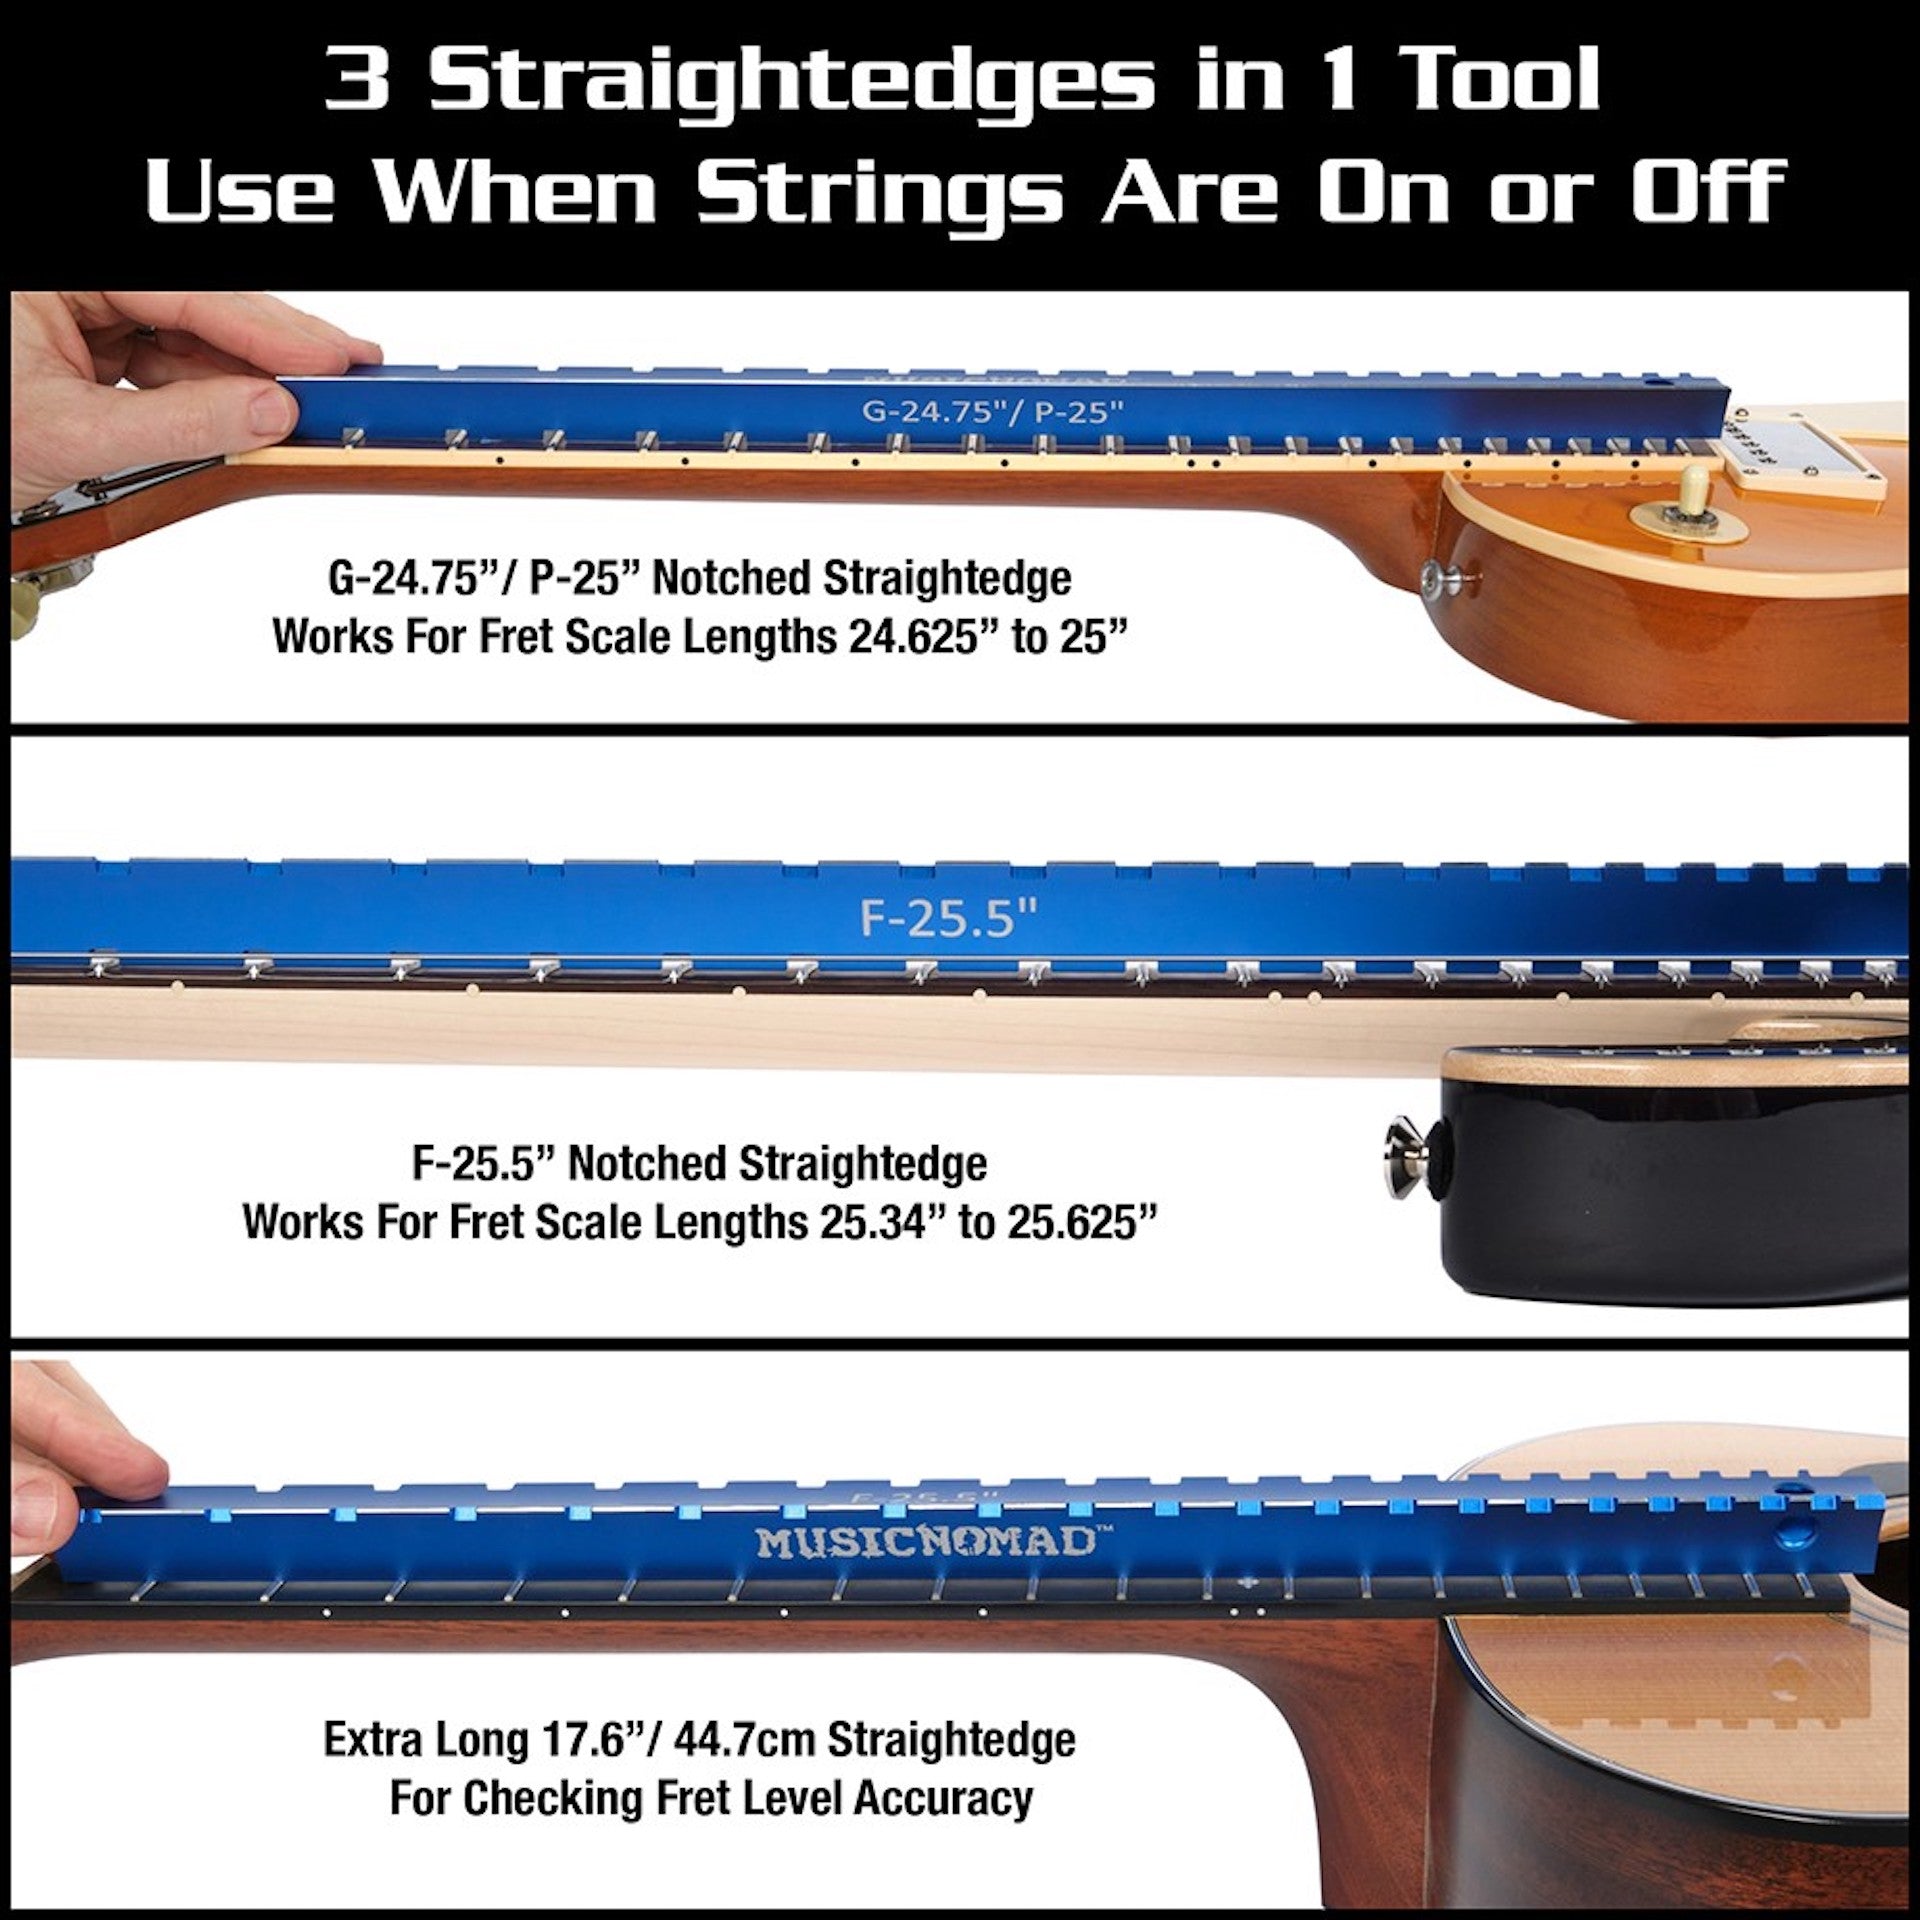 MusicNomad Tri-Beam 3 'n 1 Dual Notched Straightedge & Precision Straightedge for Acoustic and Electric Guitars  (MN821) - HIENDGUITAR   musicnomad musicnomad